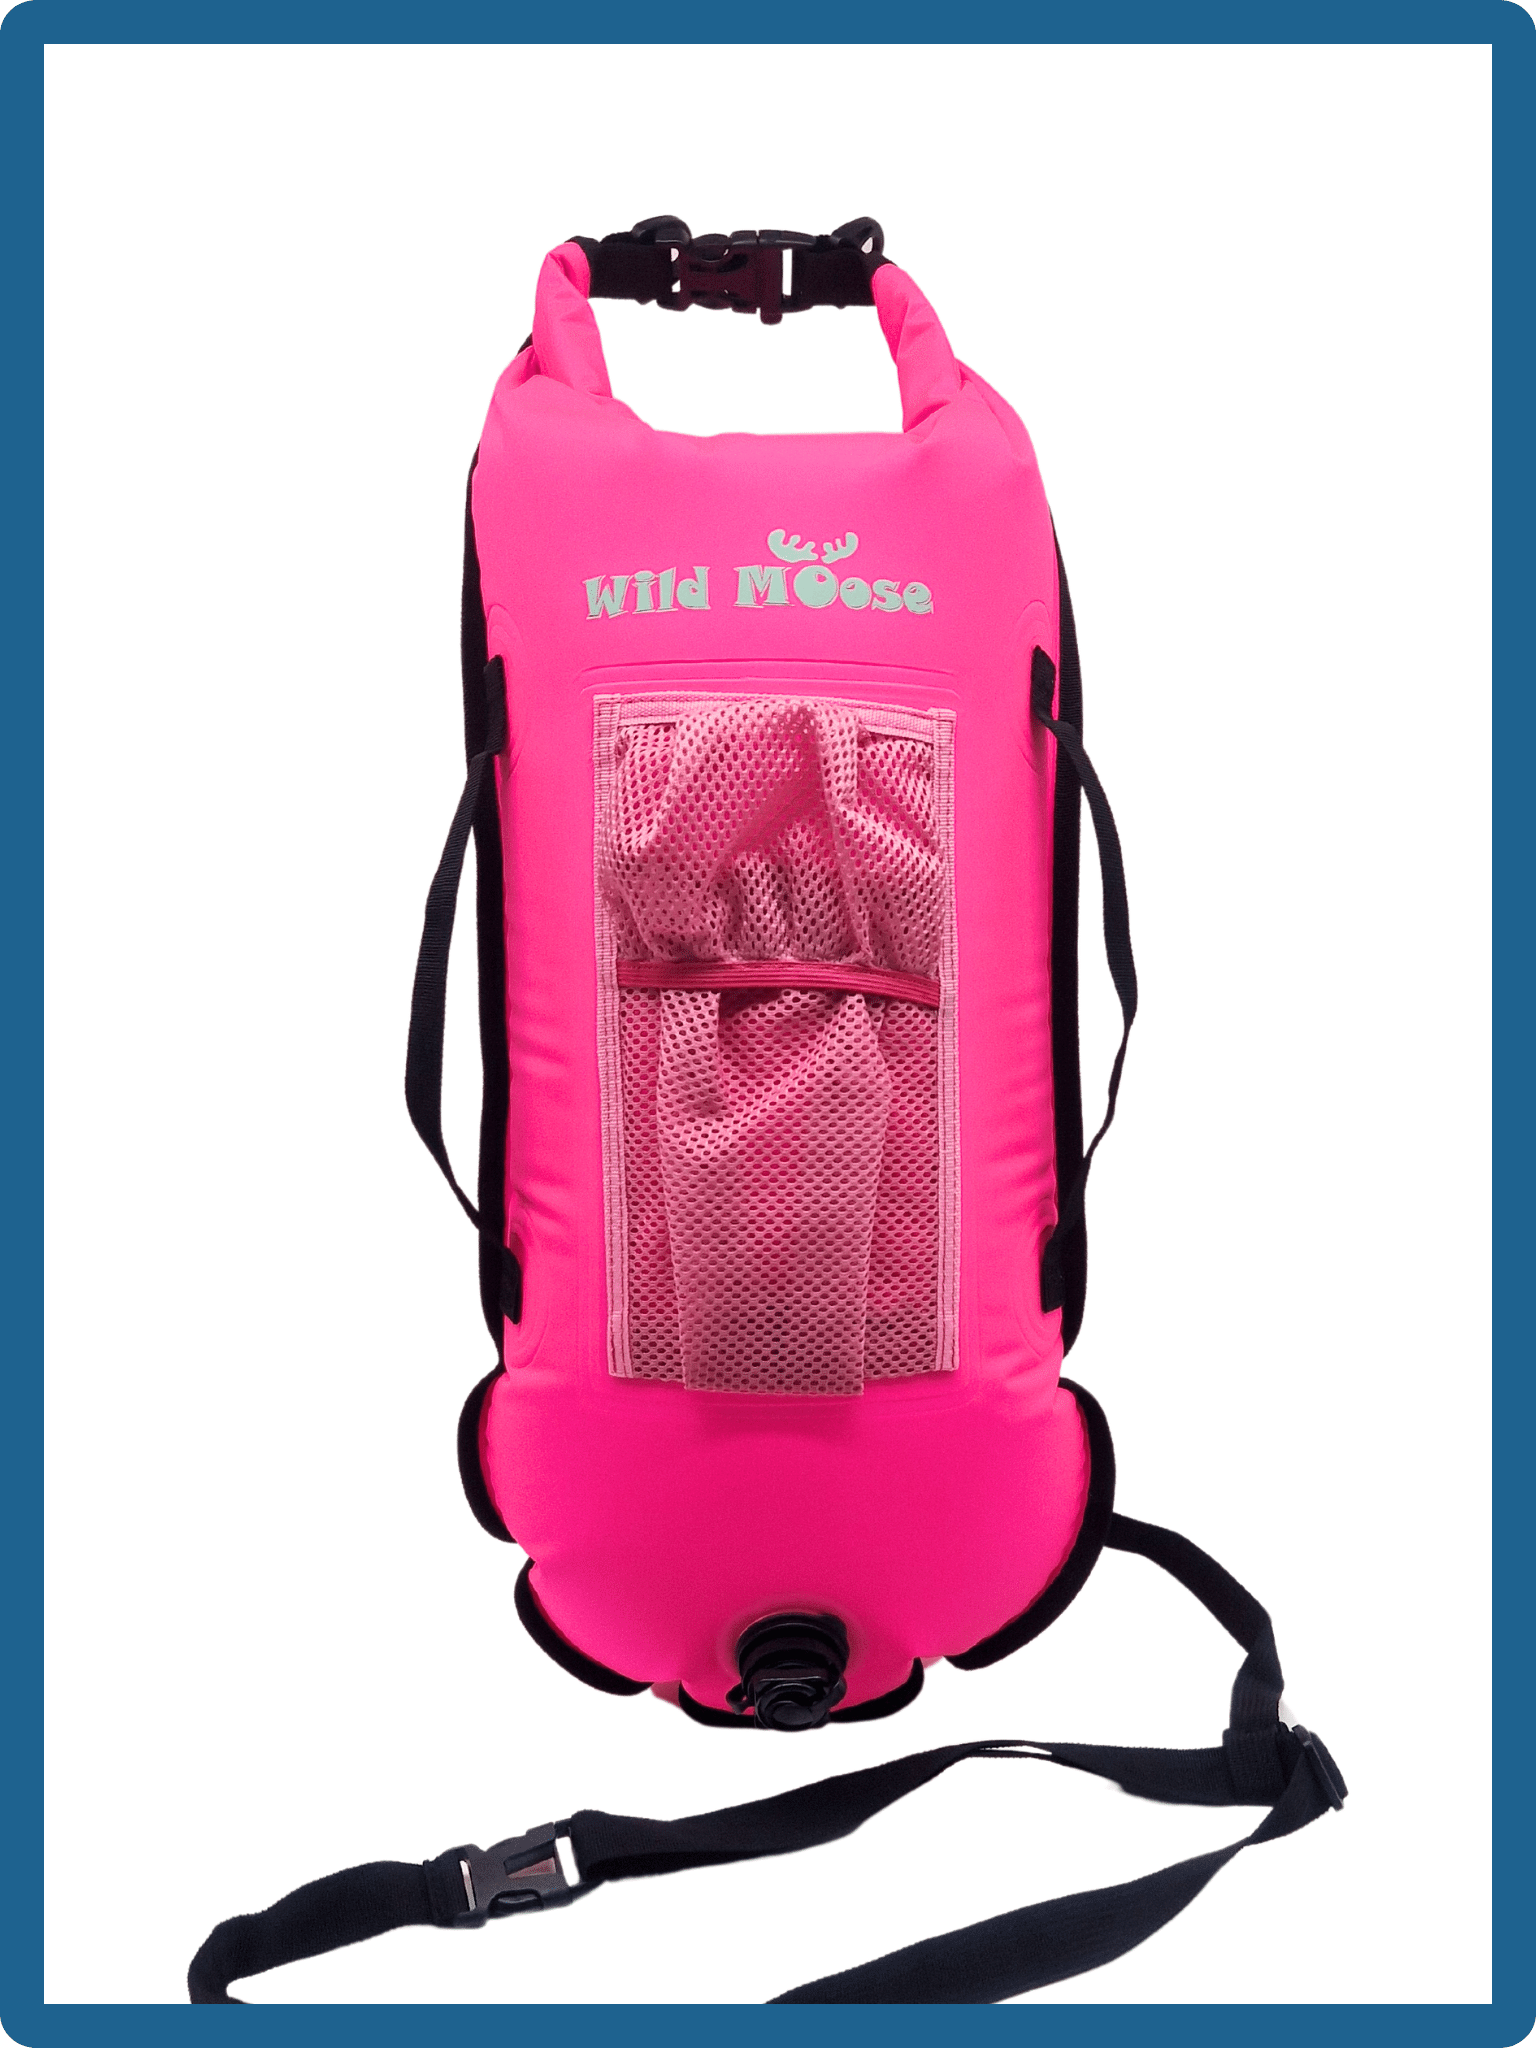 28L bright pink tow floats with mesh top pocket and black handles and leash